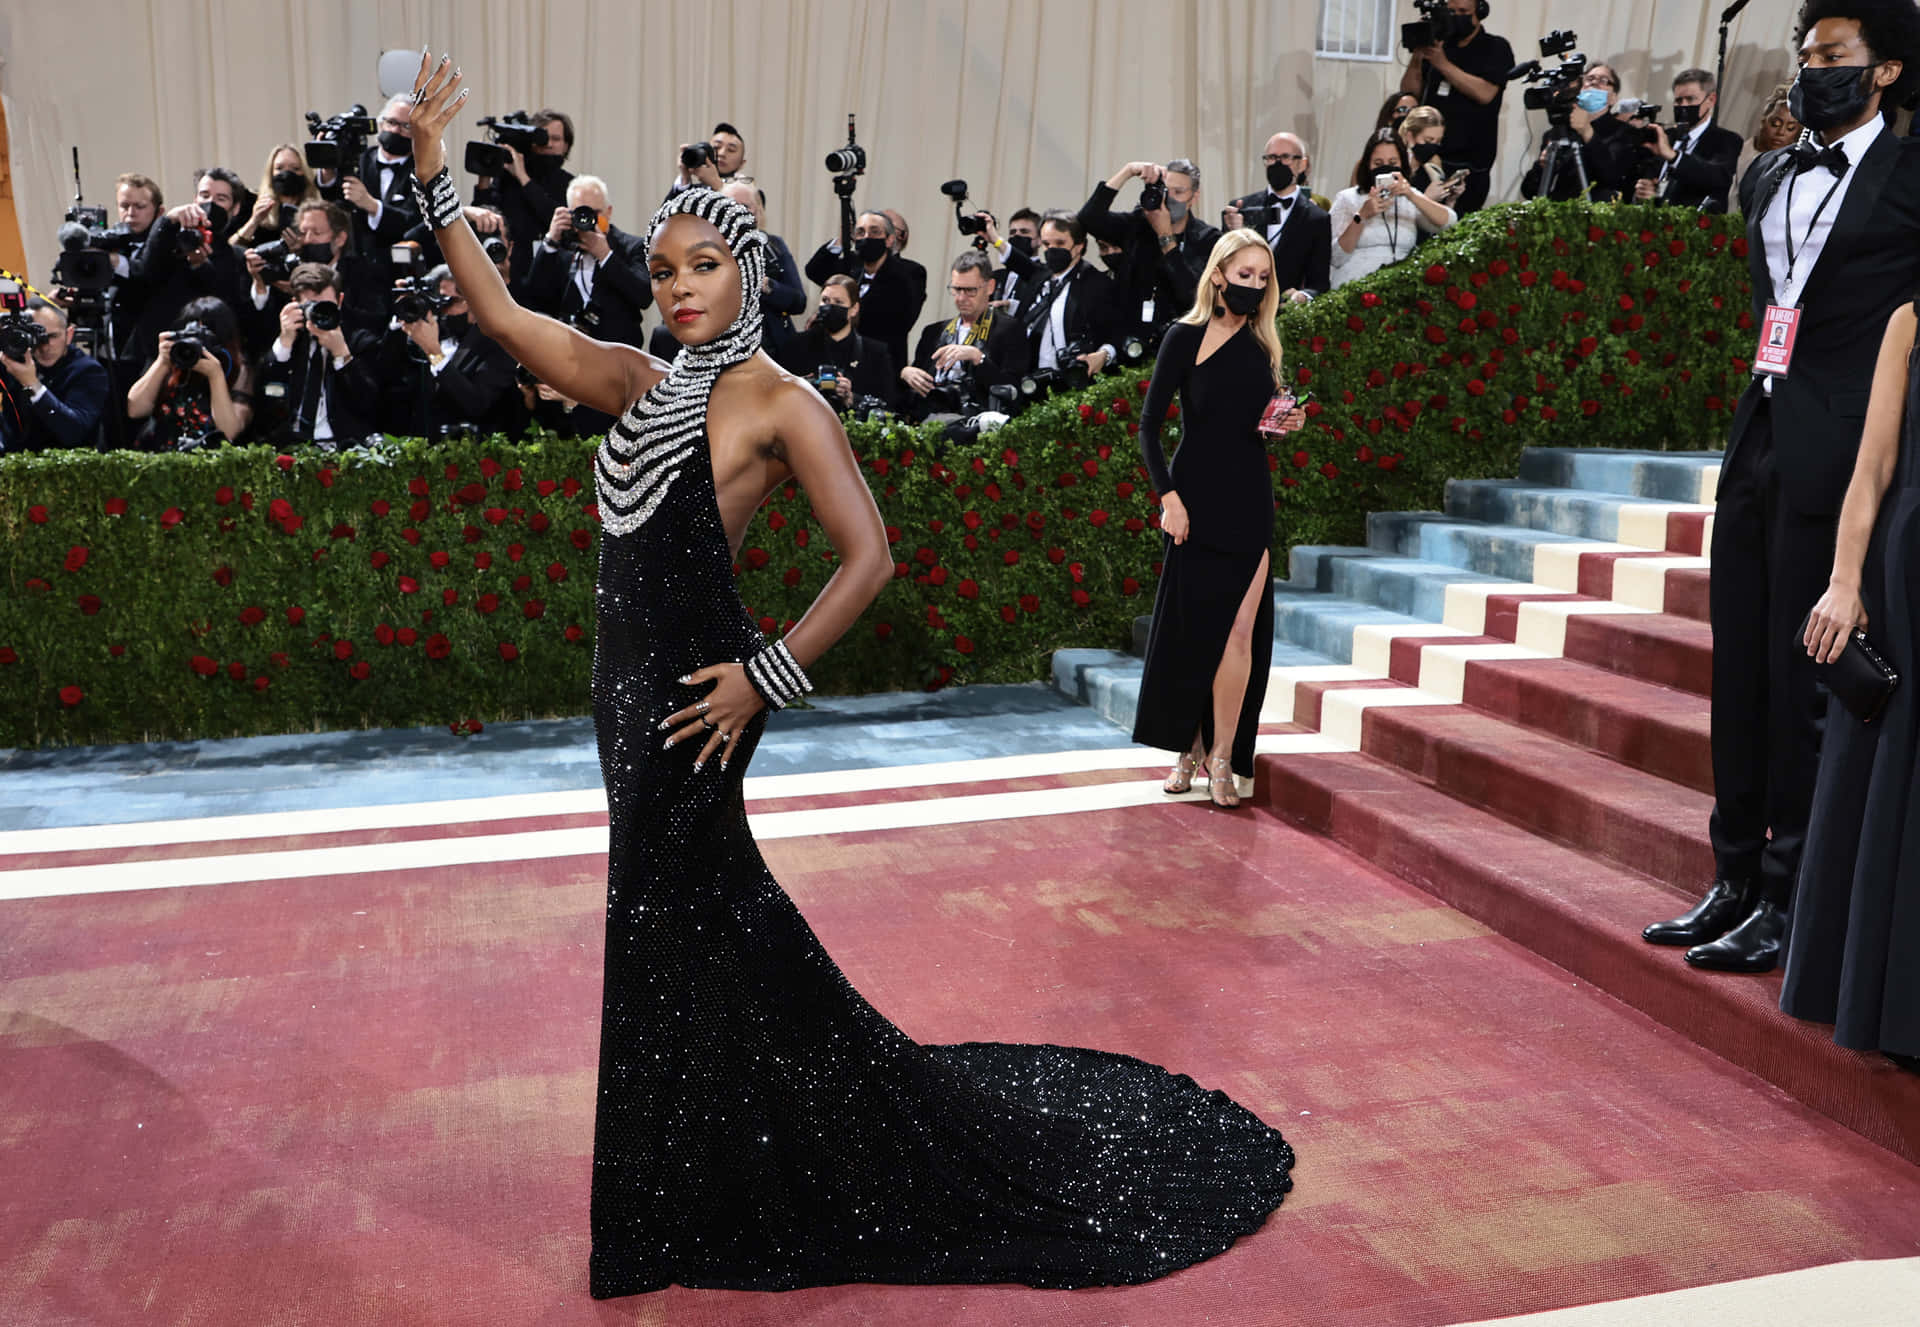 Celebrities gather for the 2019 Met Gala in New York